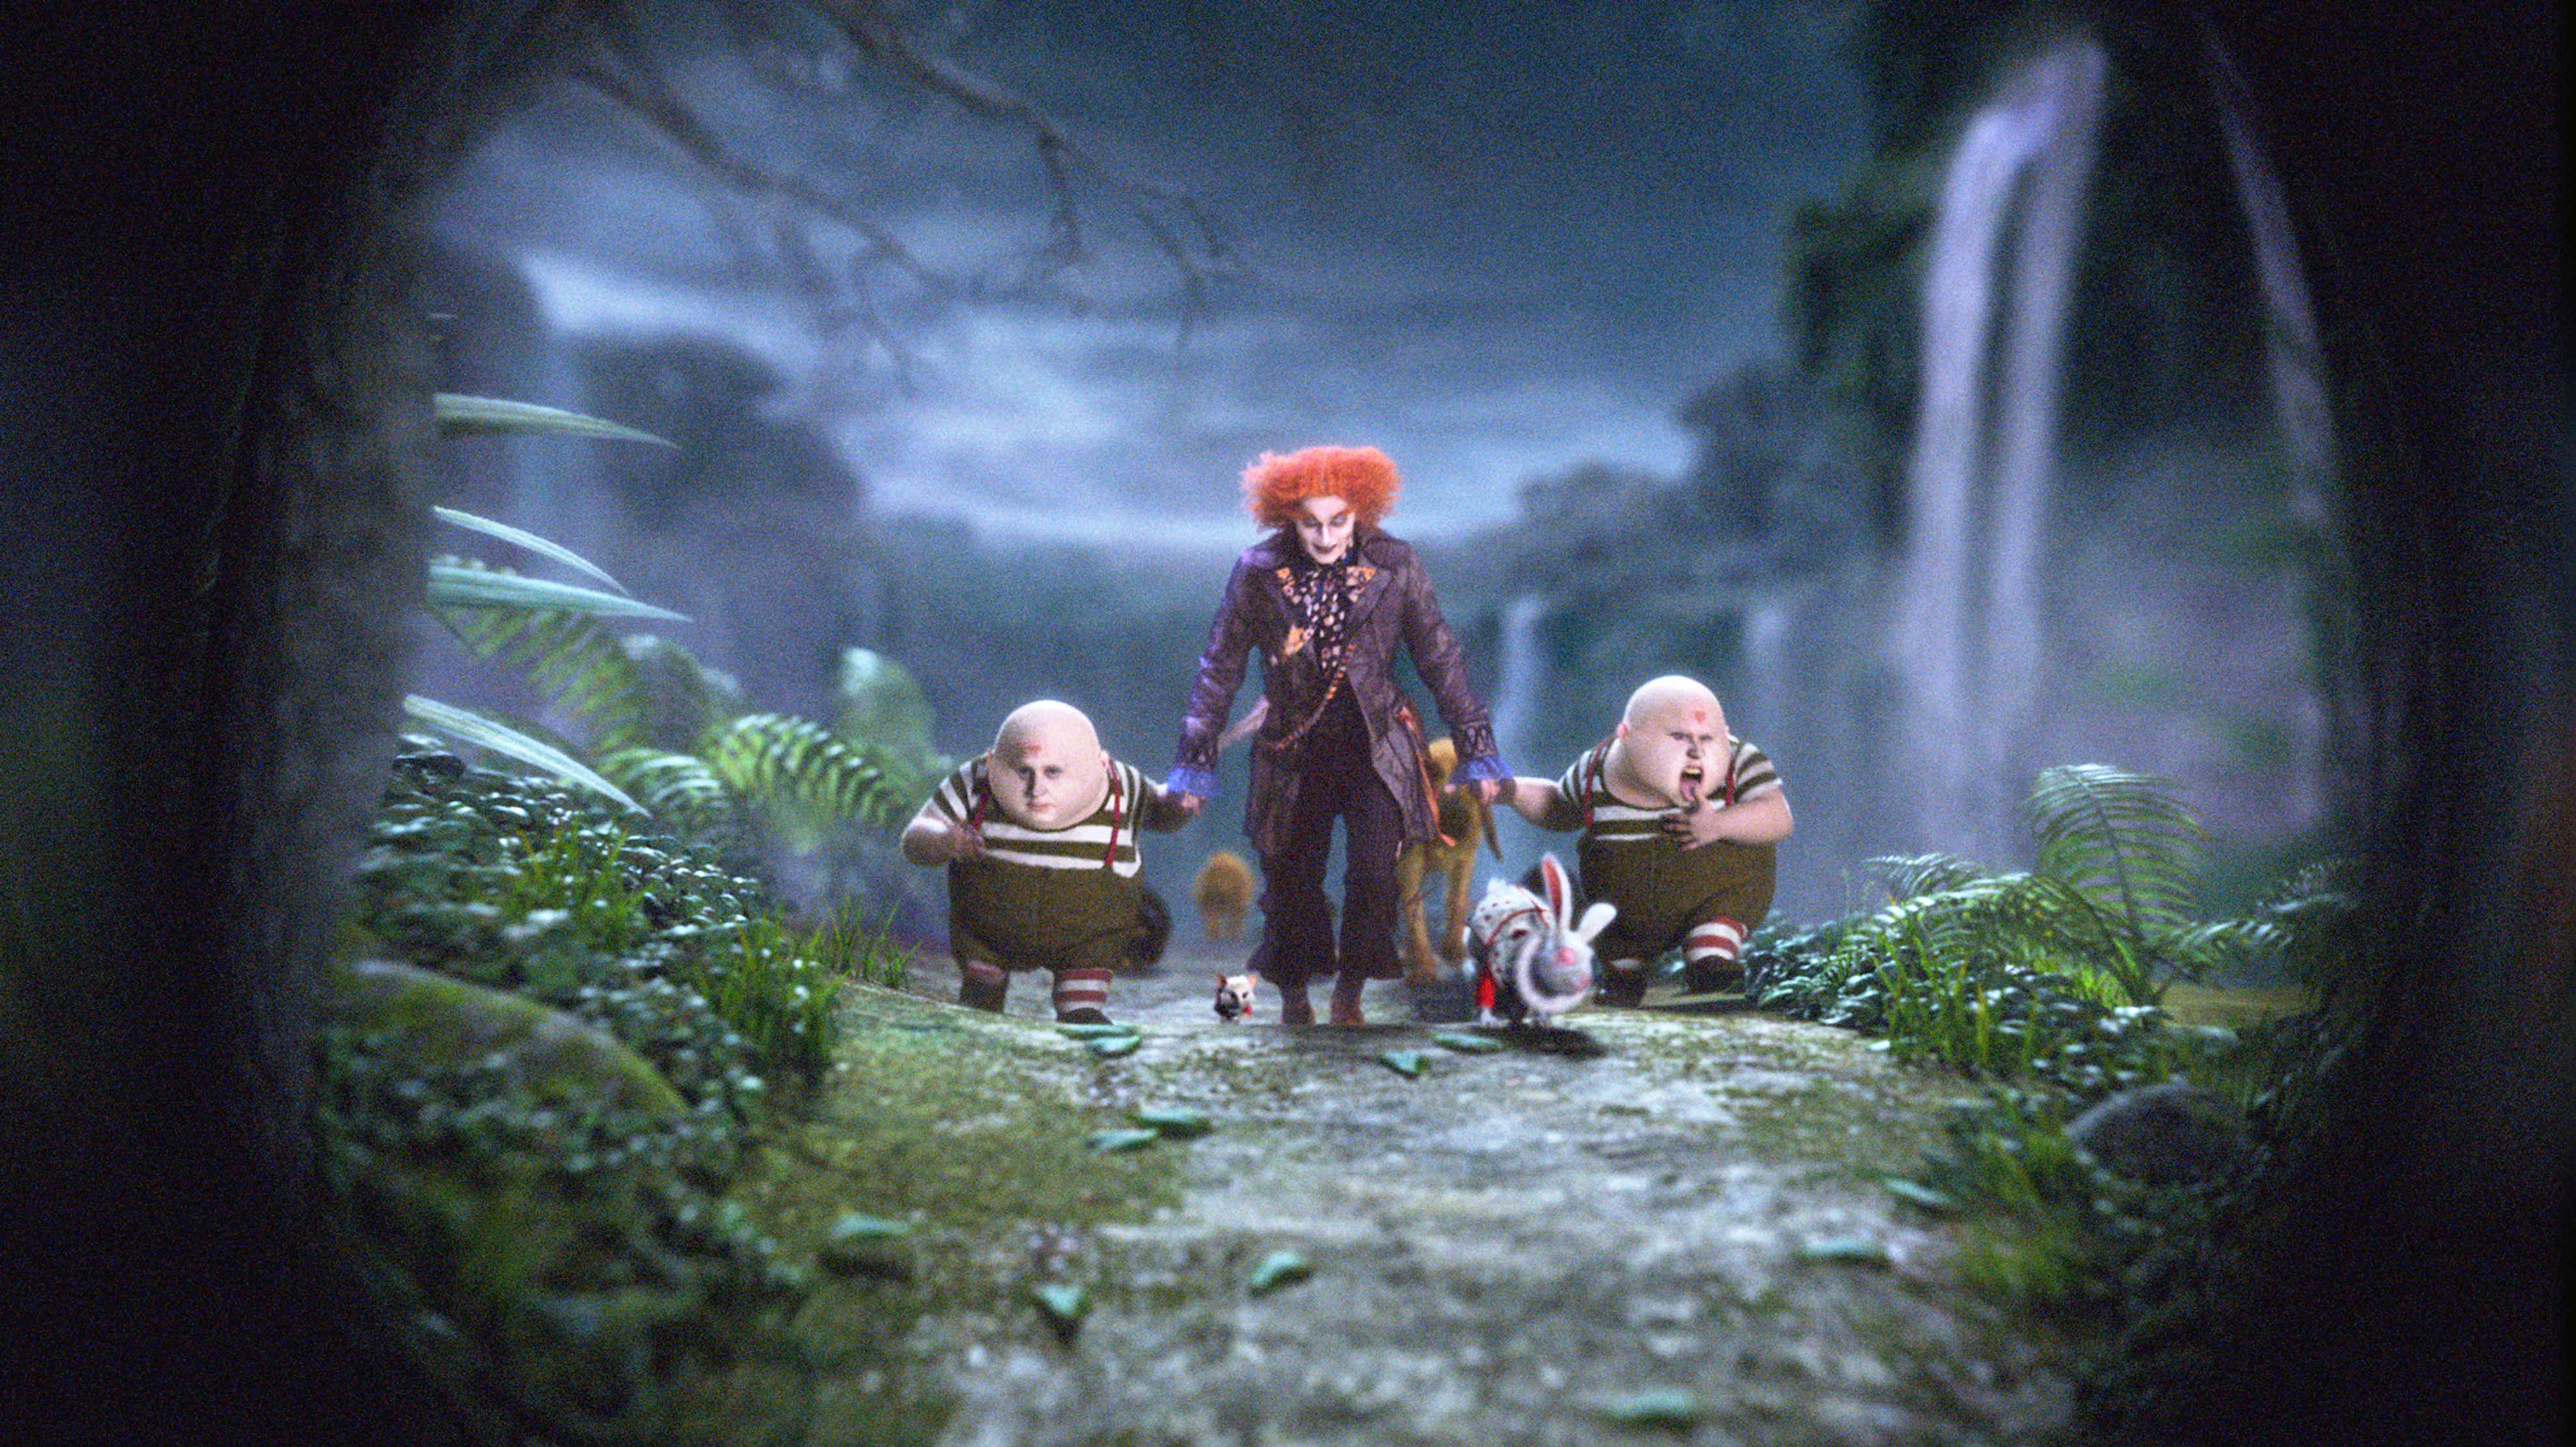 new-featurette-and-images-from-alice-in-wonderland-shared